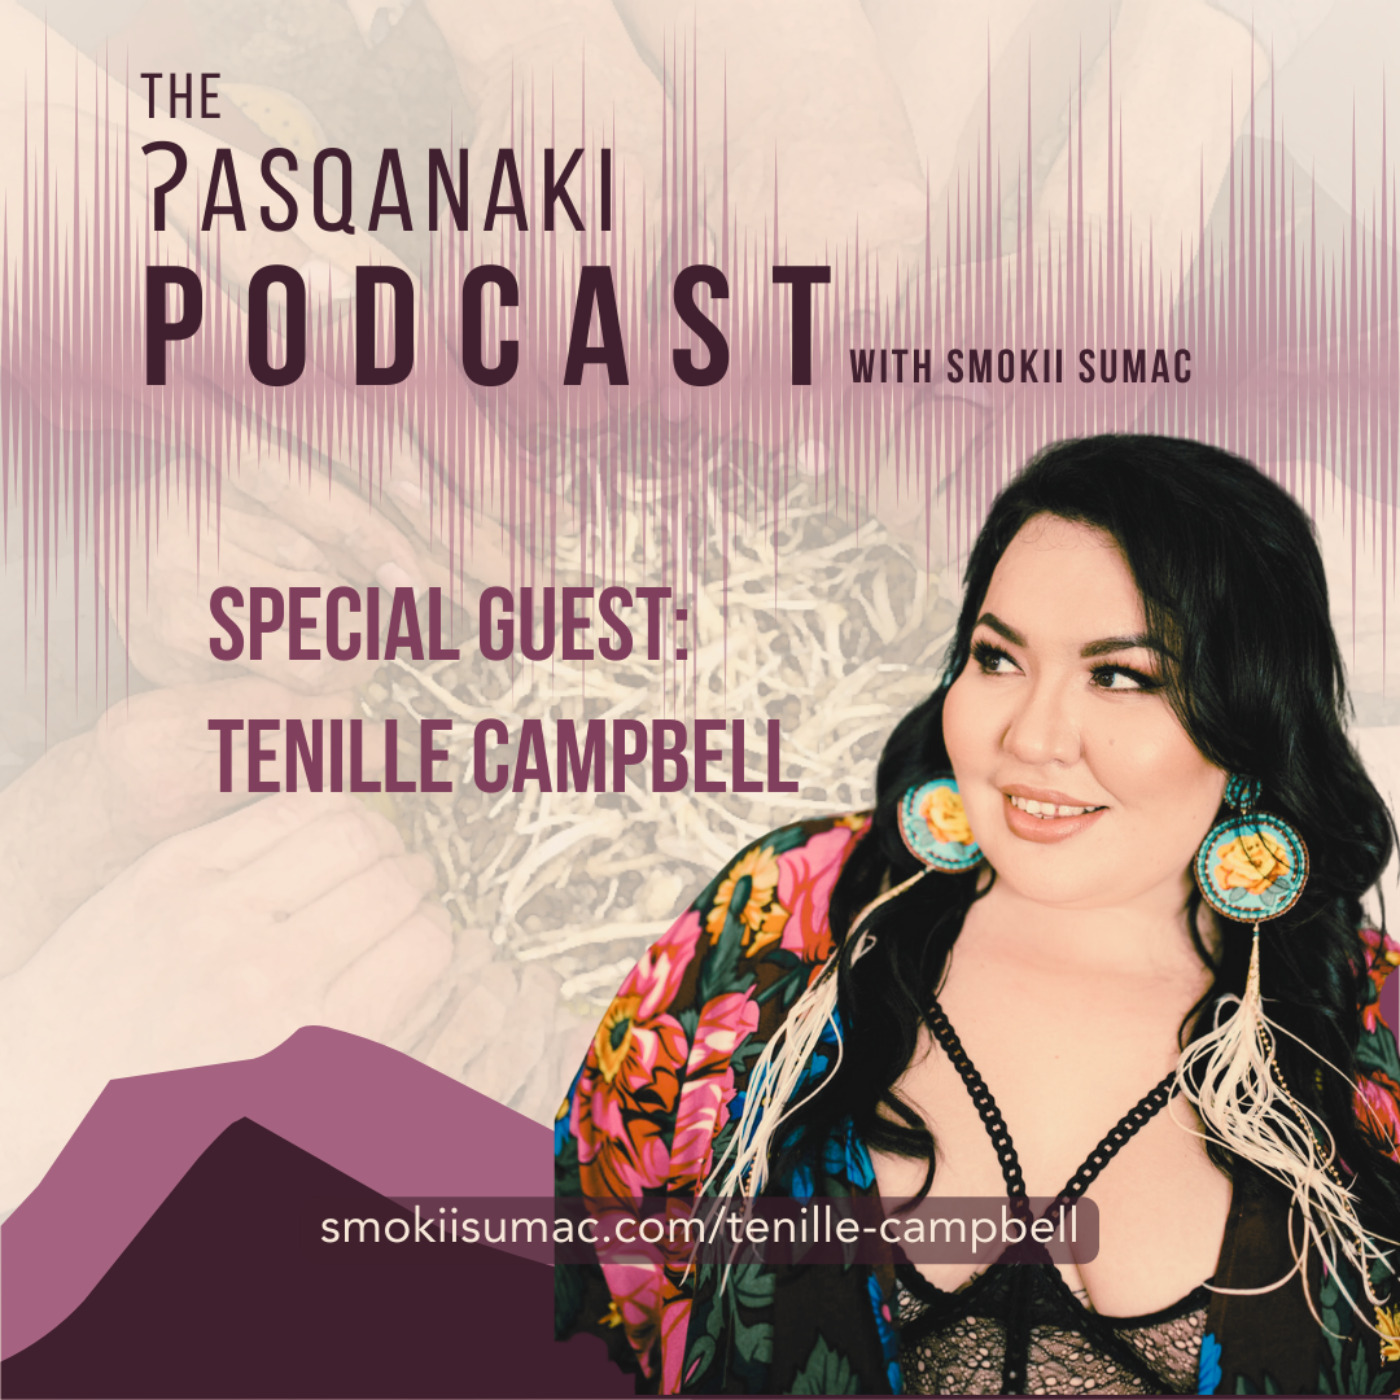 The ʔasqanaki Podcast by Smokii Sumac with guest Tenille Campbell